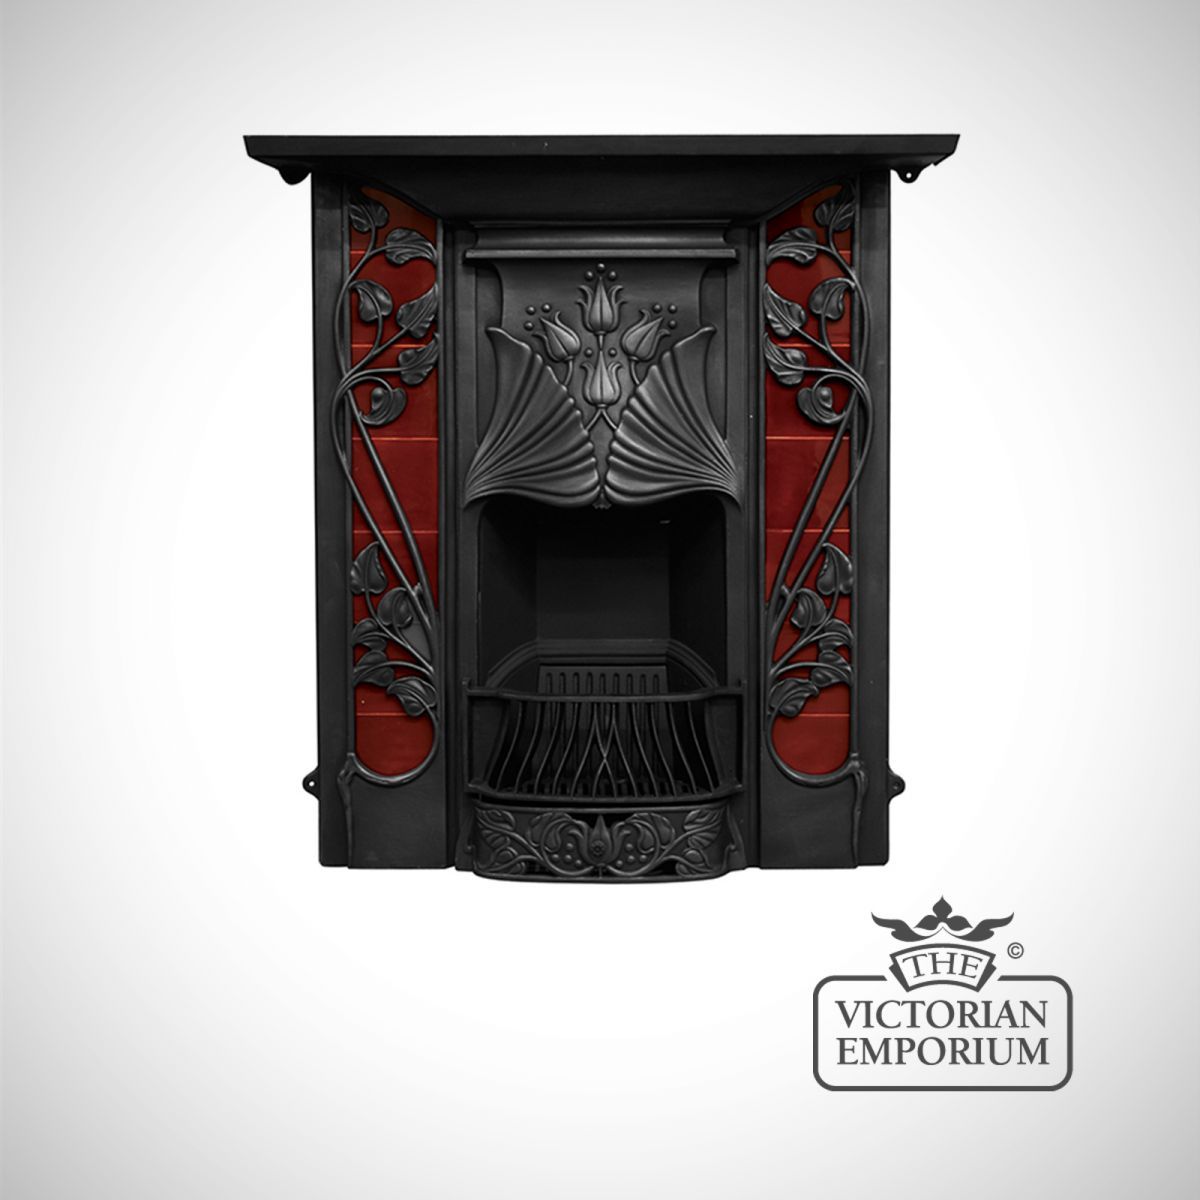 American Heritage Fireplace Inspirational 612 00 744 68 Us Dollar the toulouse Art Nouveau Style